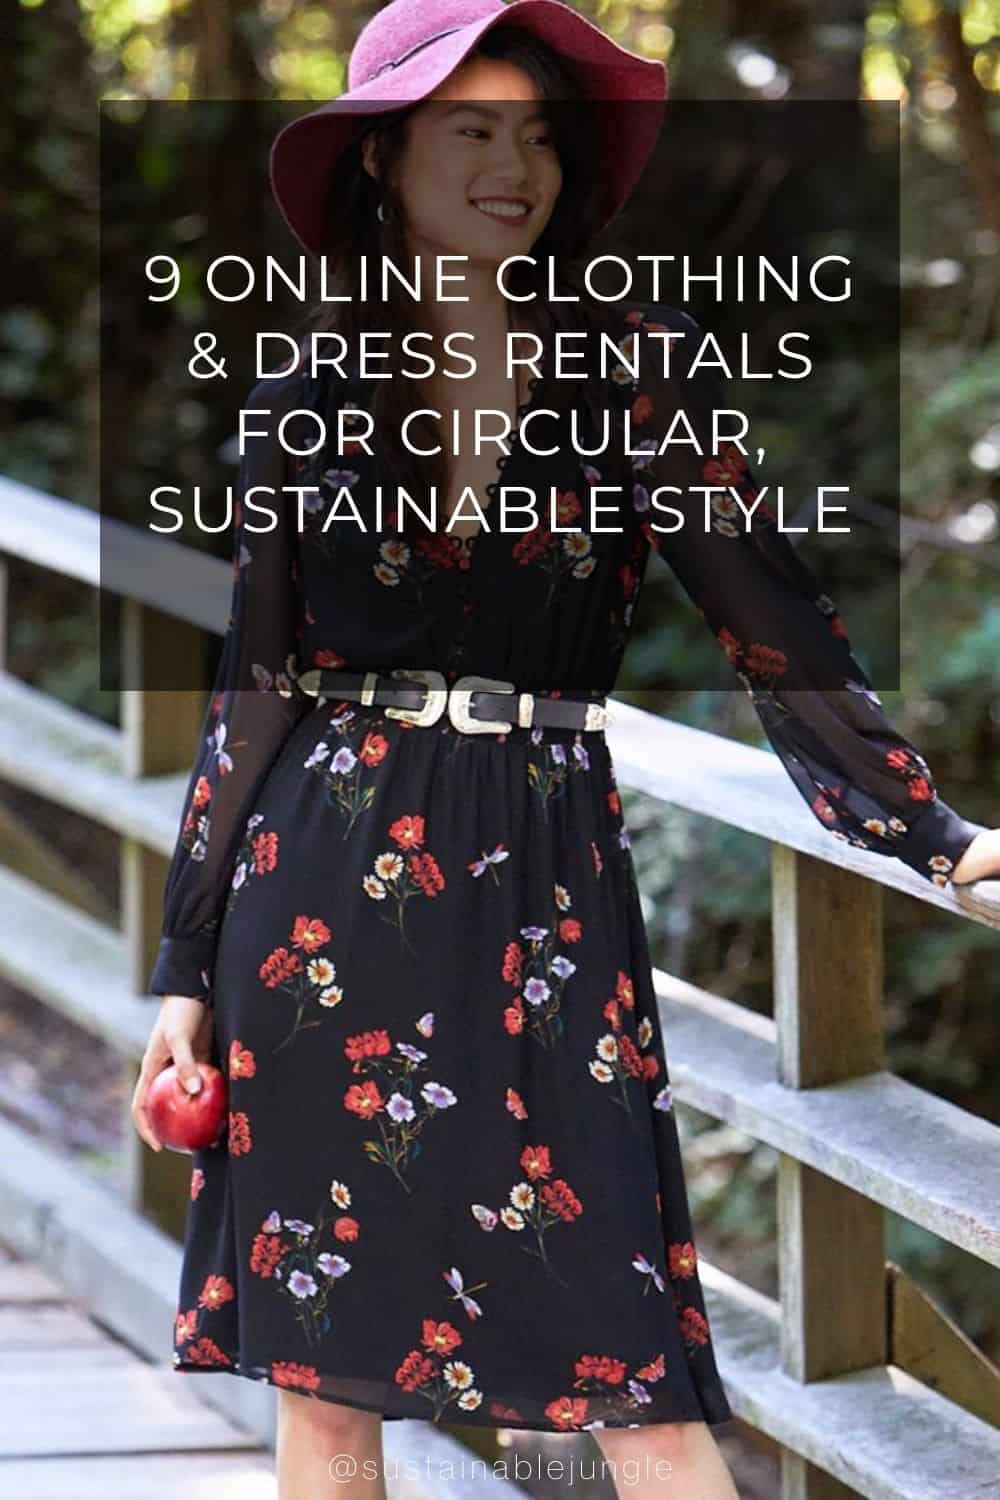 9 Online Clothing & Dress Rentals For Circular, Sustainable Style Image by Le Tote #dressrentals #rentdresses #dressrentalonline #formaldressrental #clothingrentalonline #onlineclothingrental #sustainablejungle